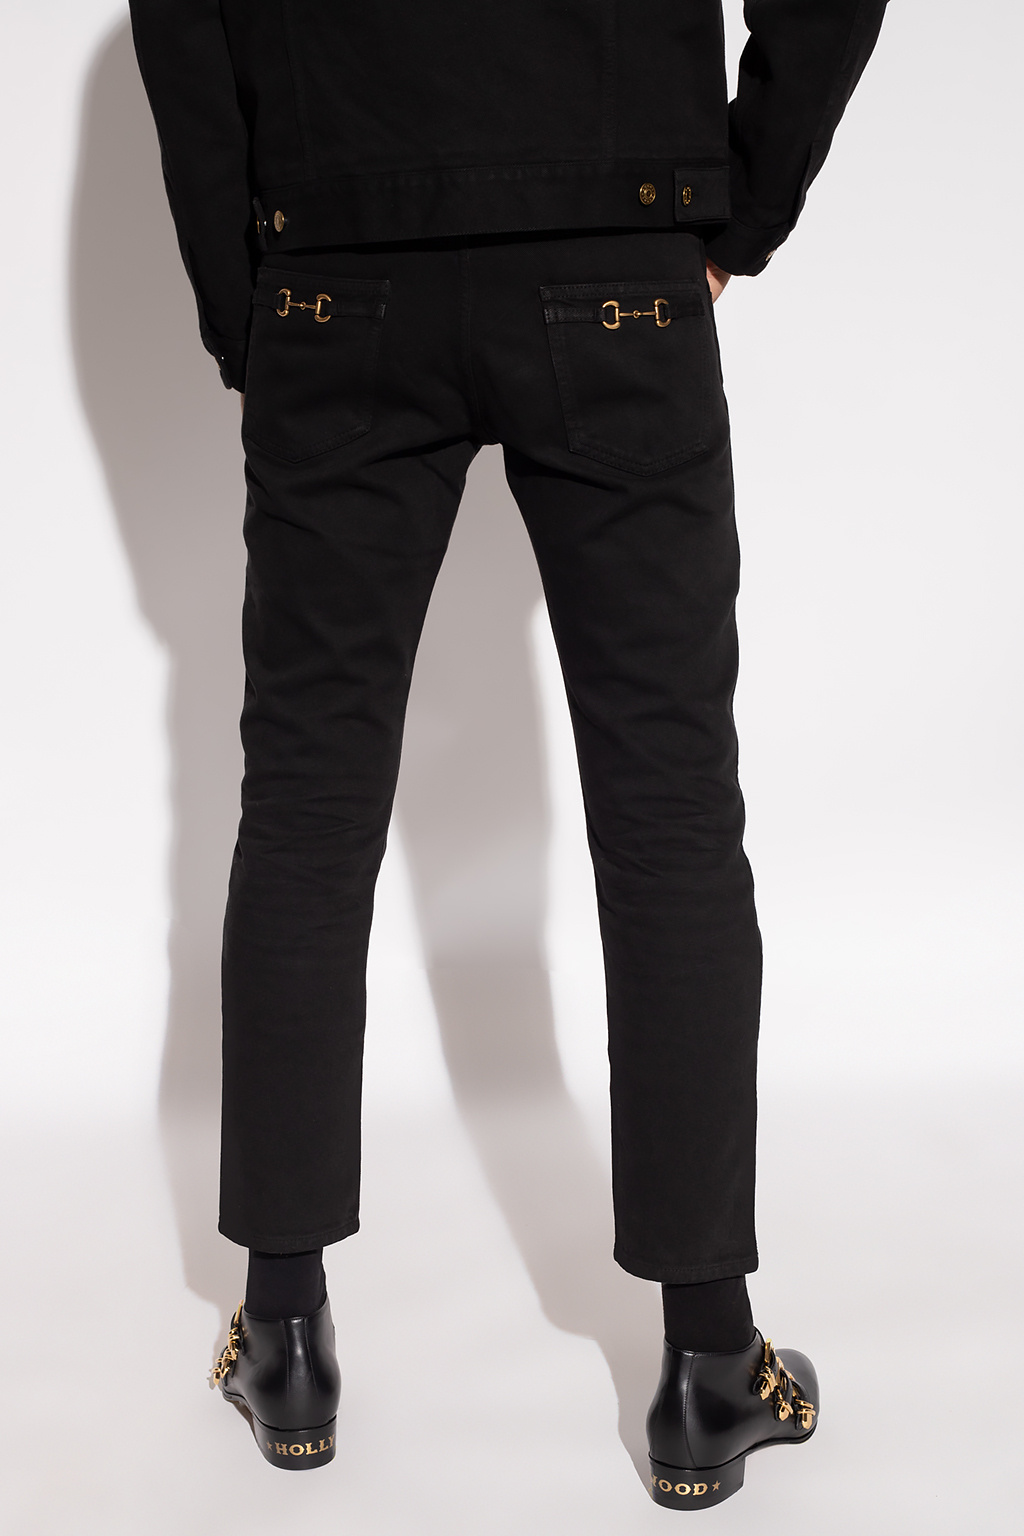 Gucci Tapered leg jeans